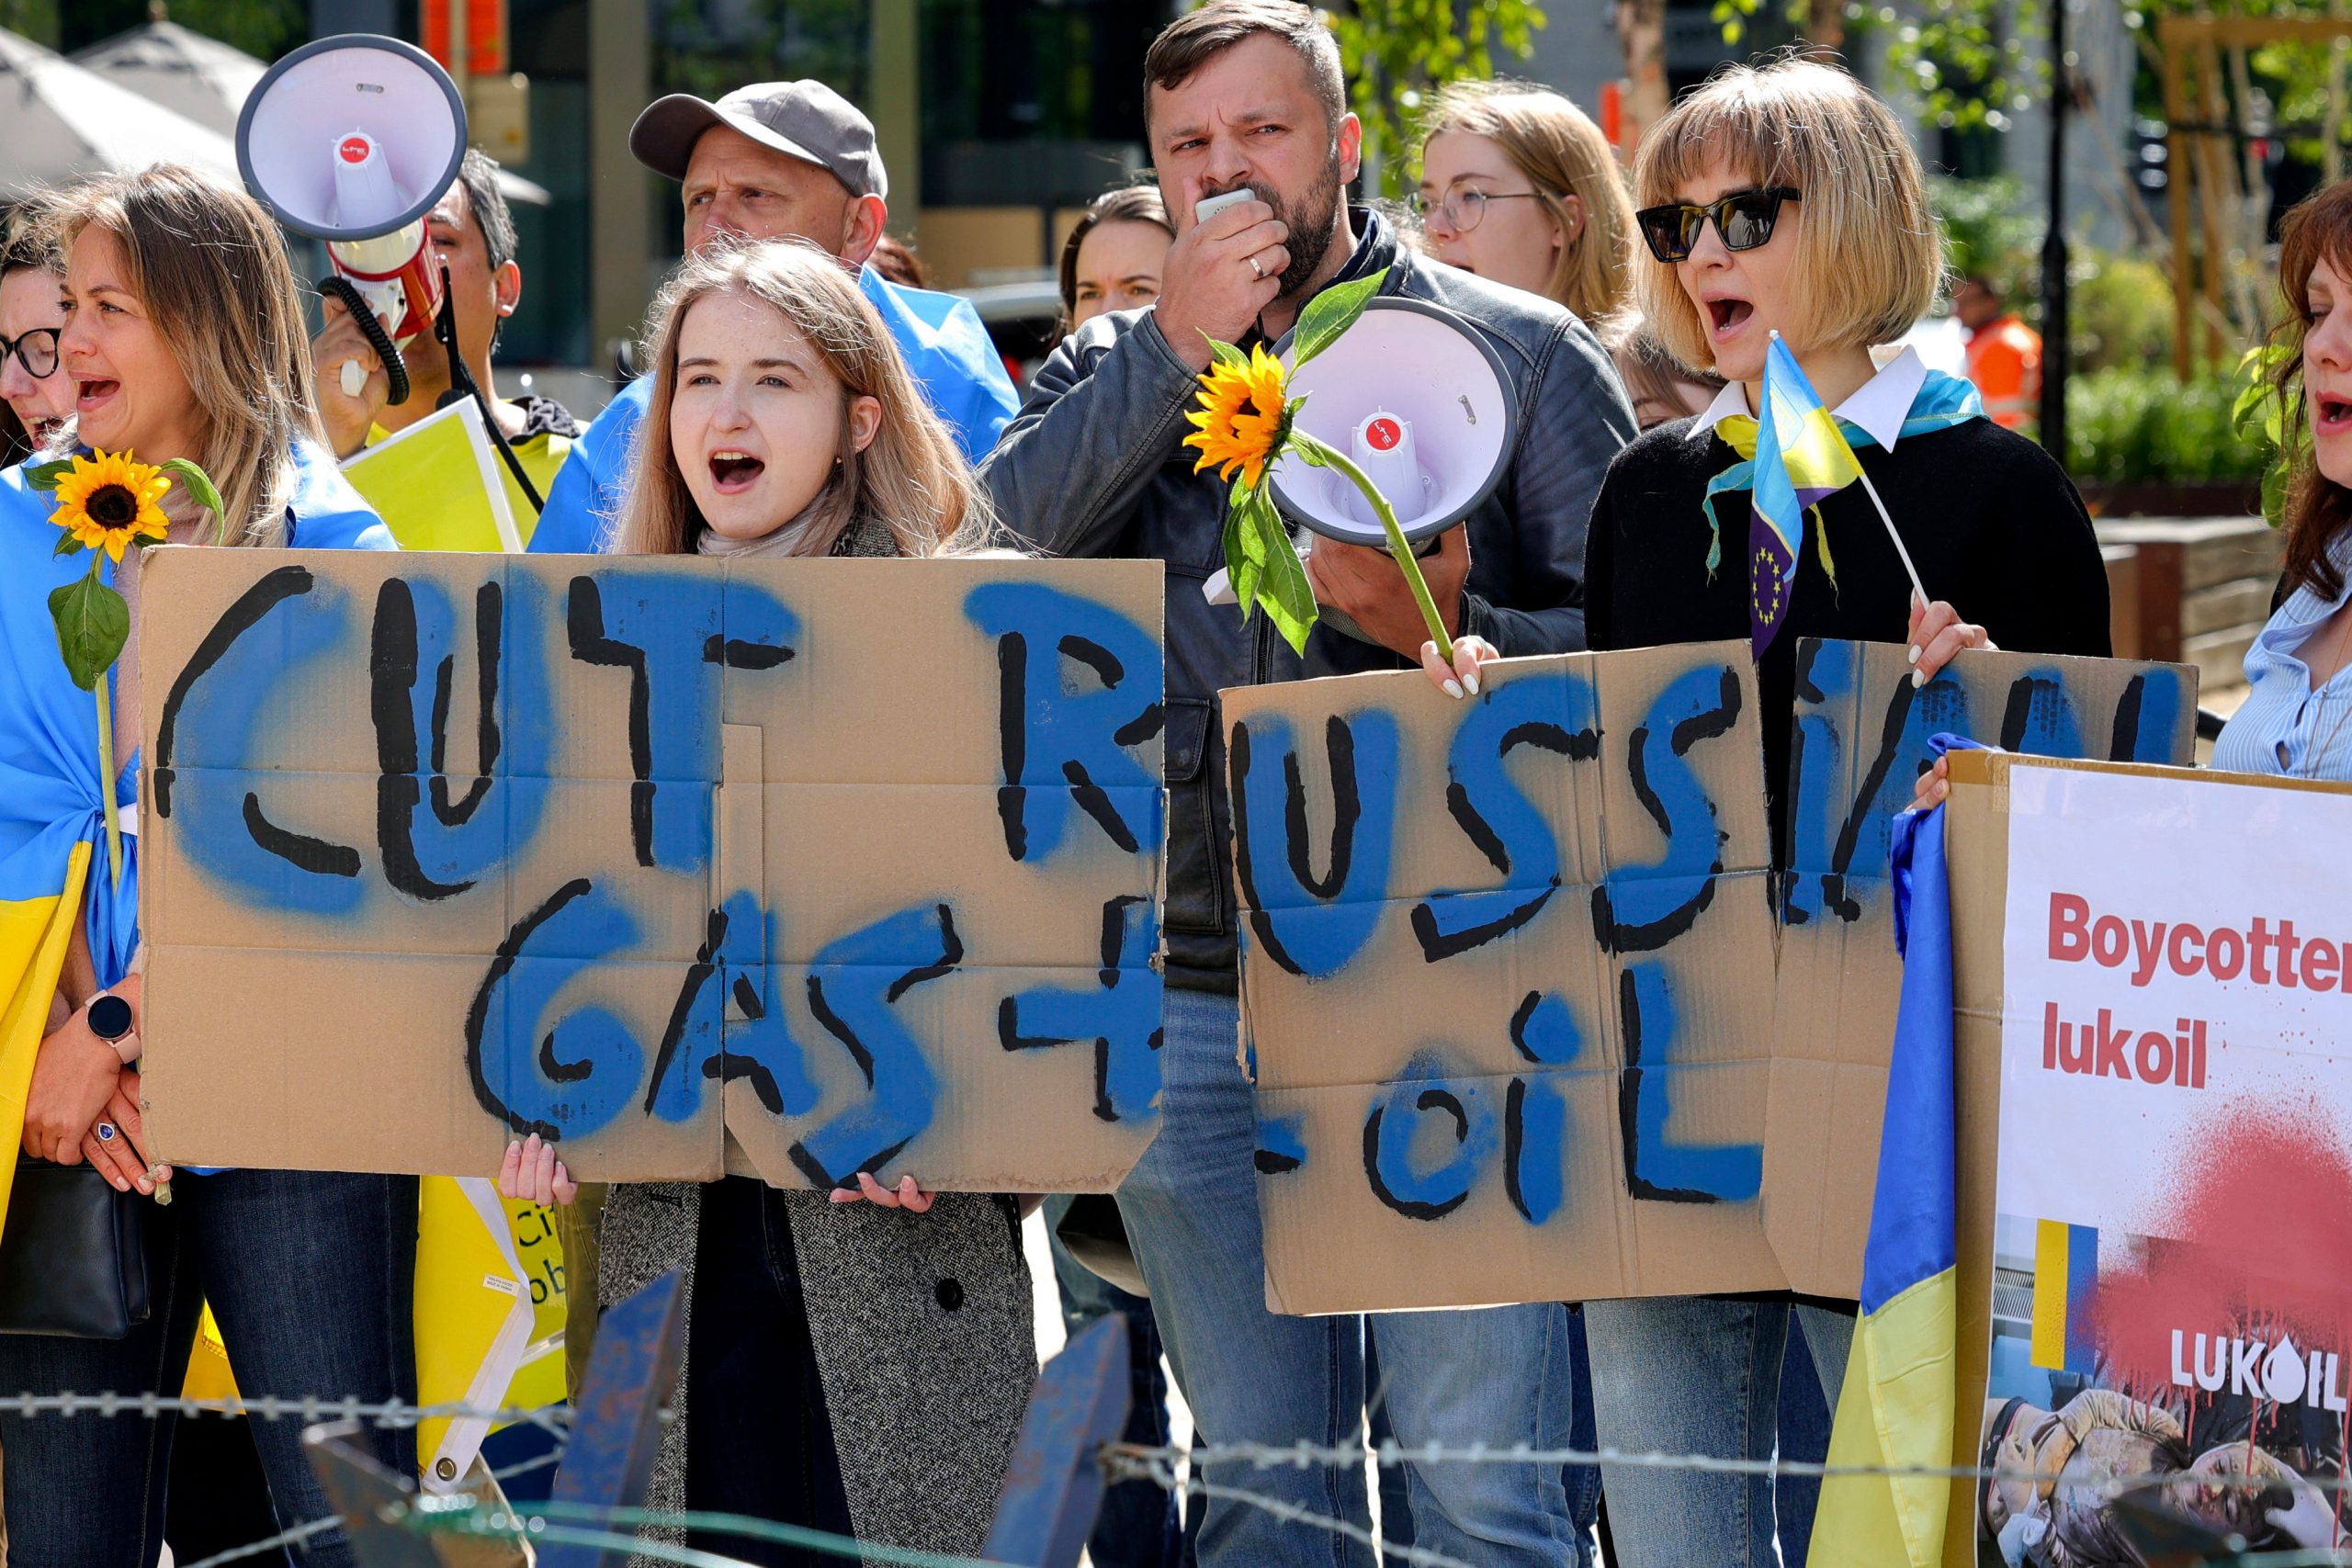 Hungary for oil: Why EU only cut off 90% of Russian fuel imports